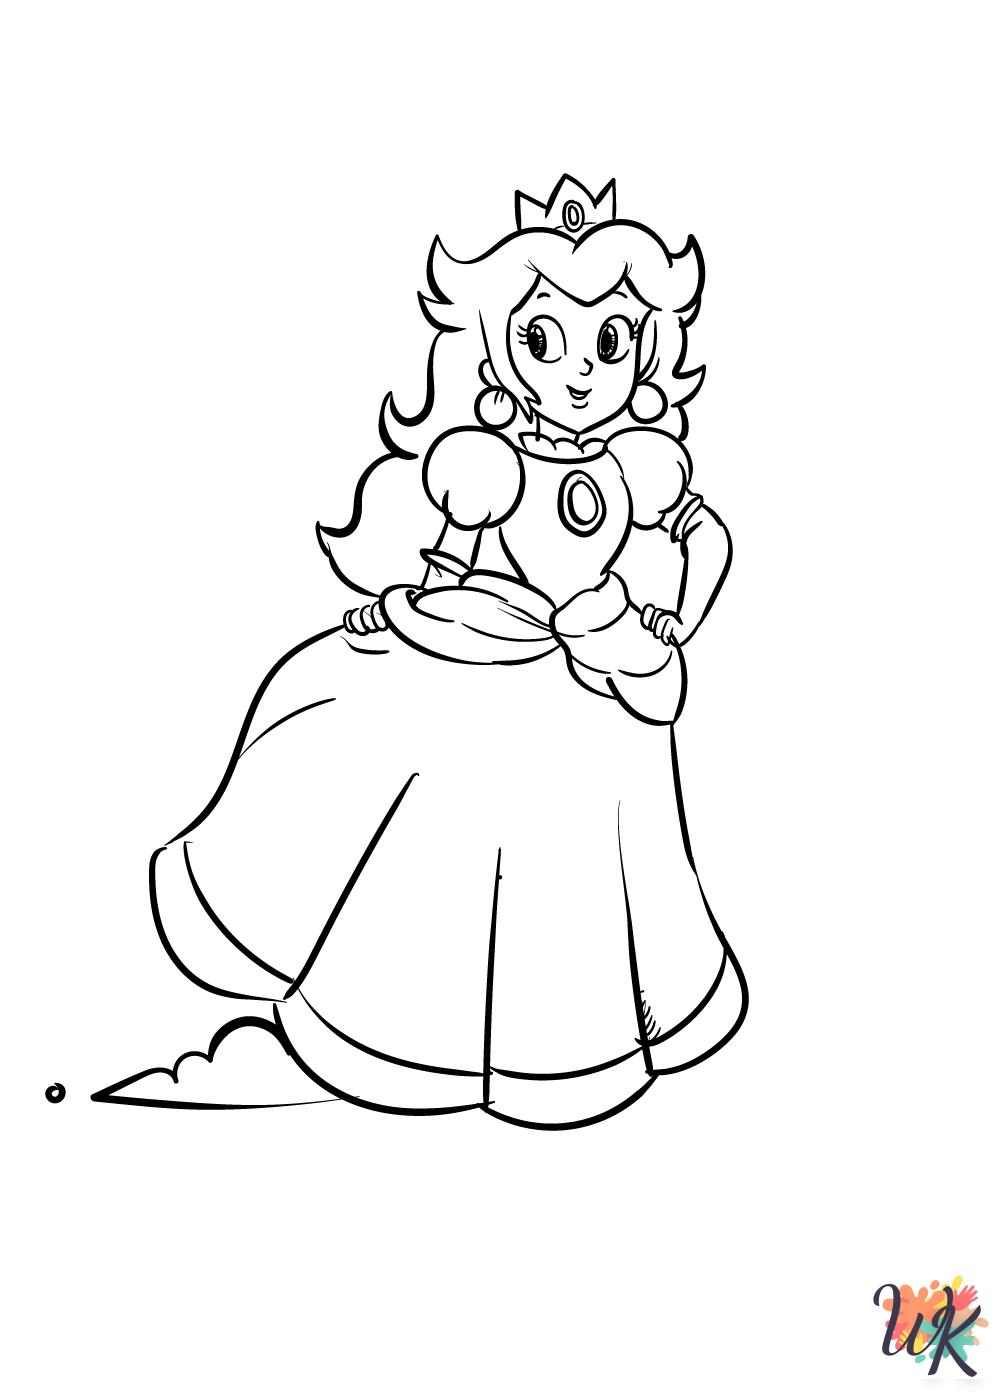 coloring pages for Princess Peach